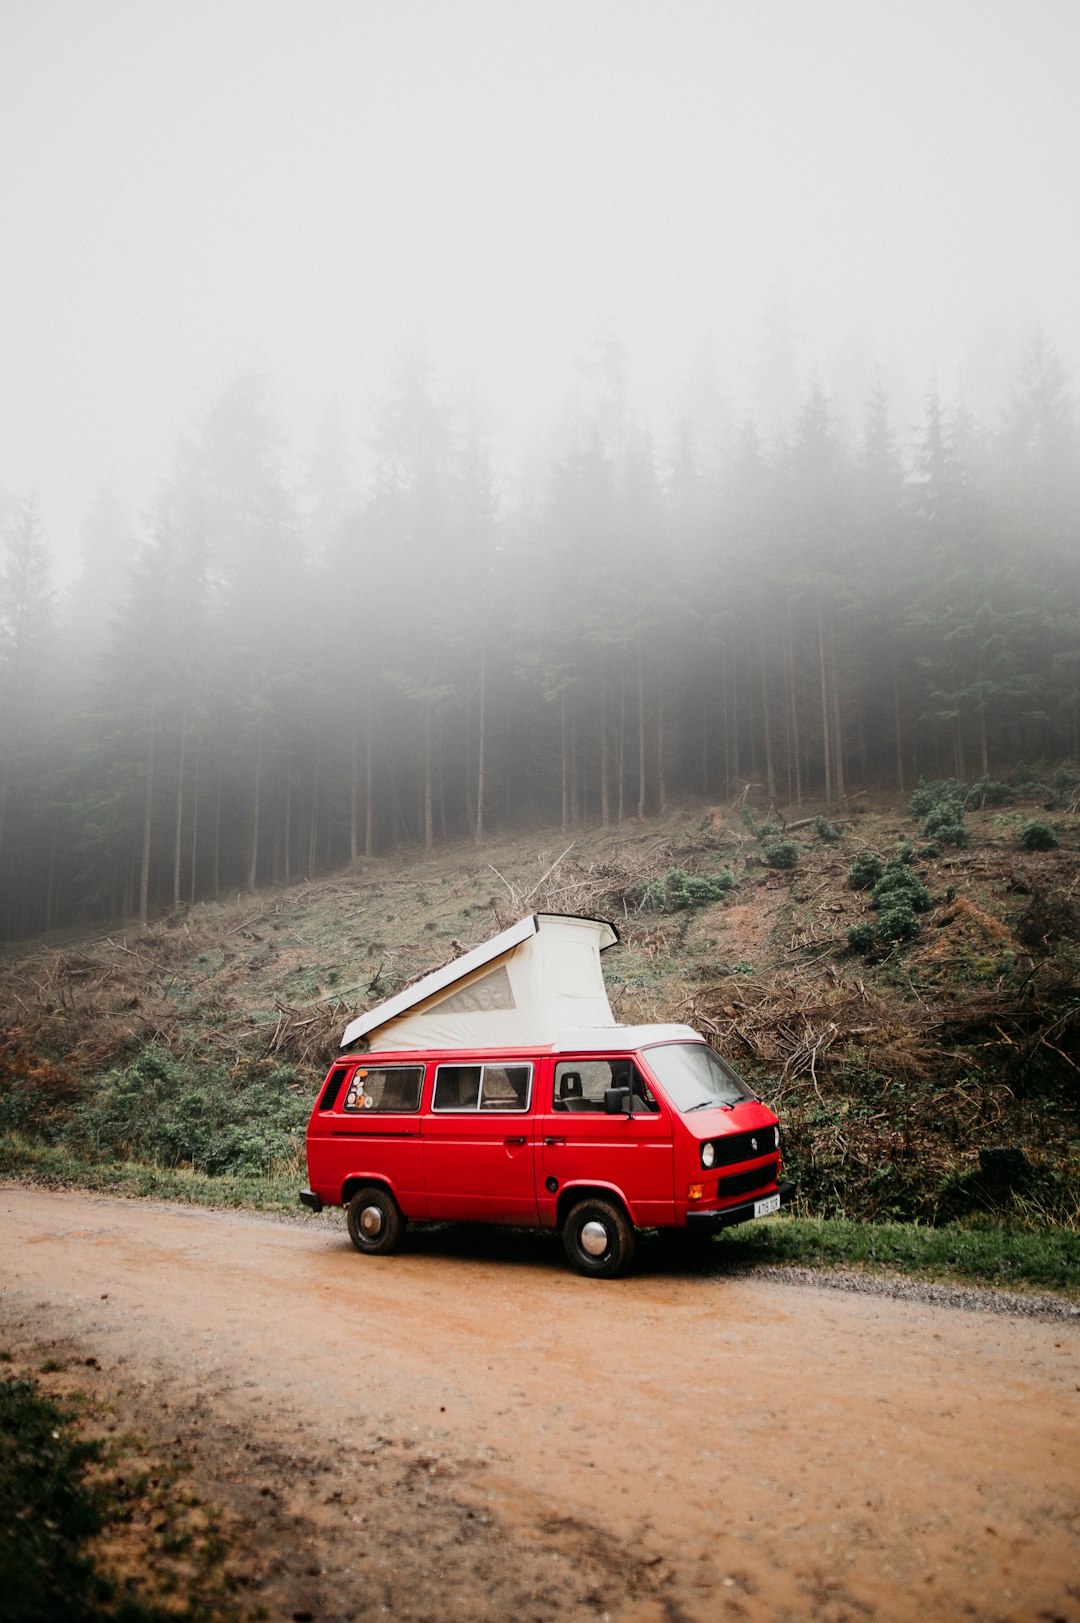 red and white van on road during foggy weather